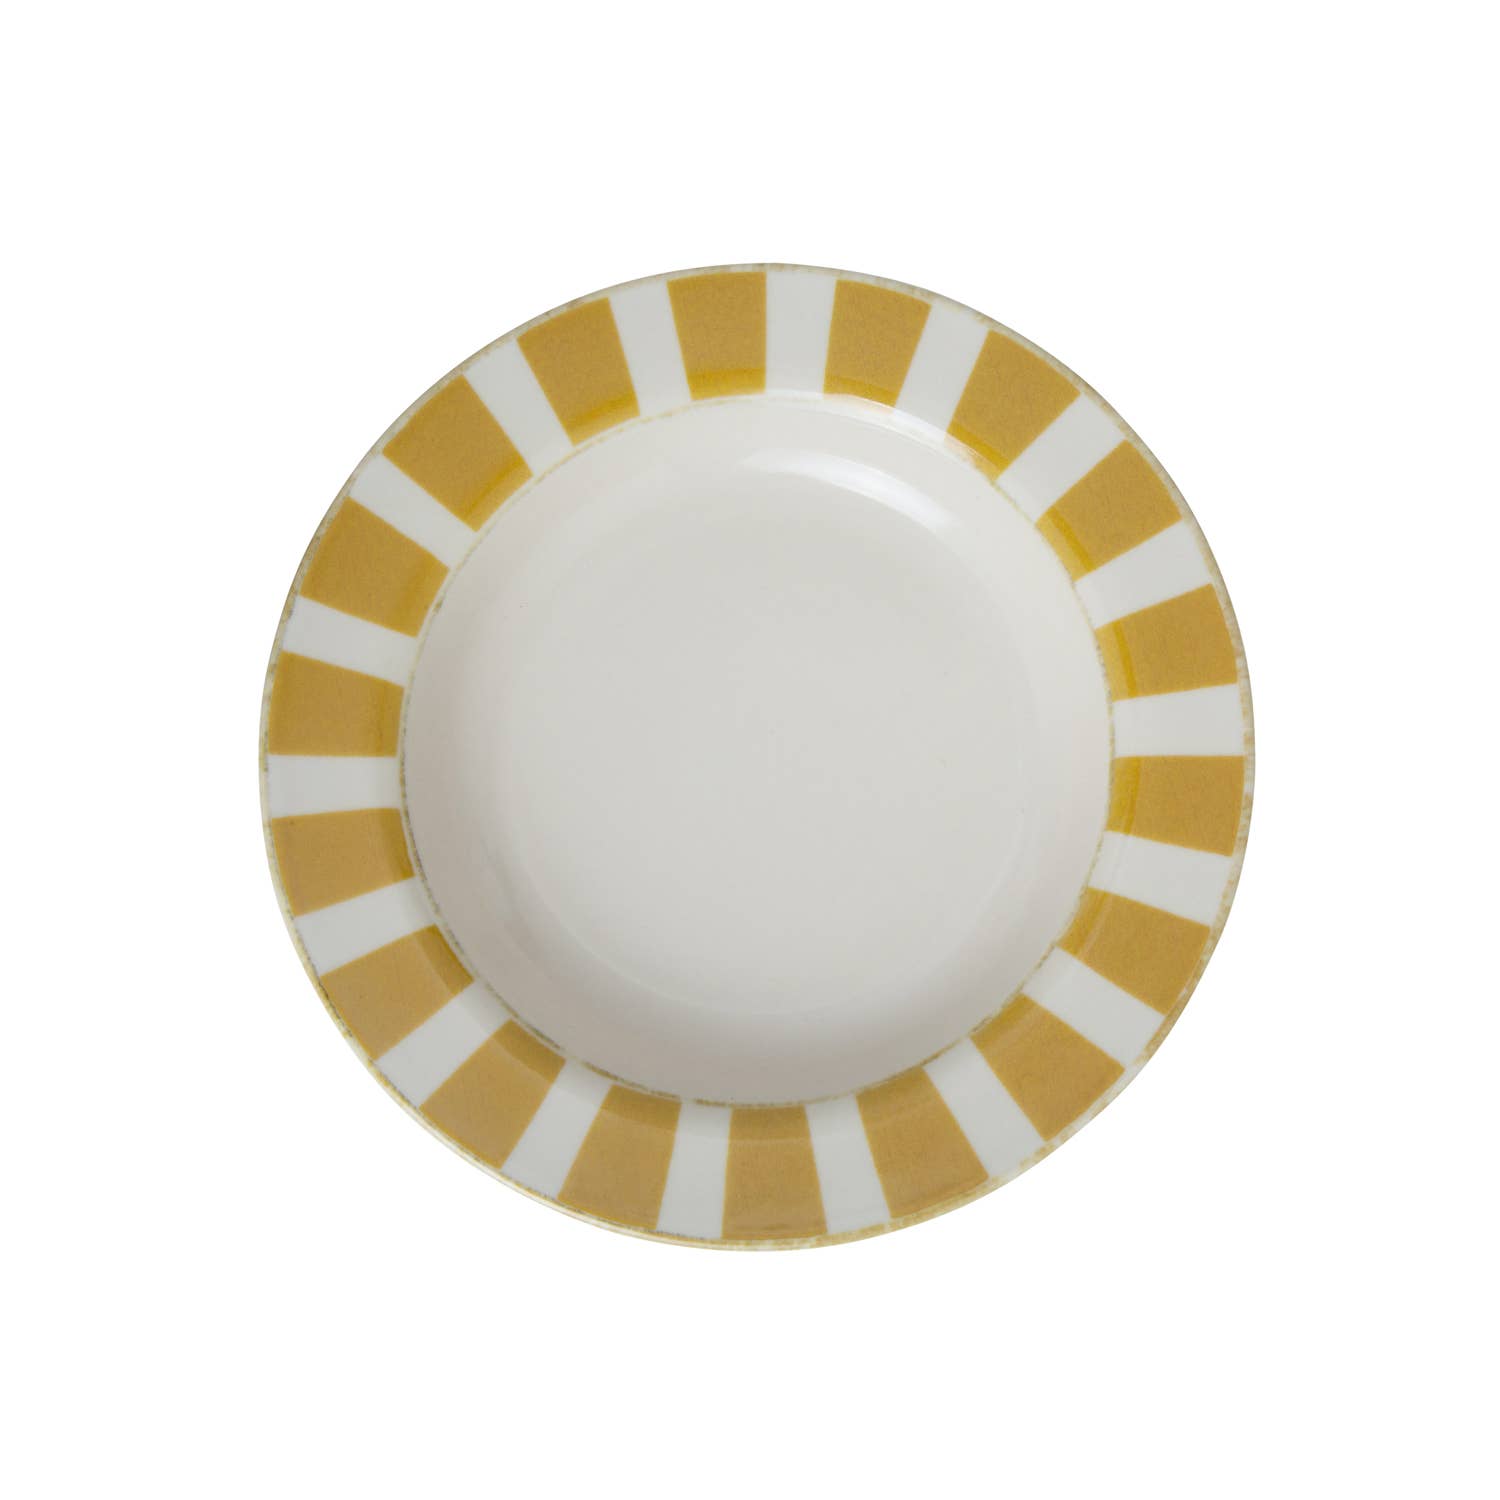 The Lino - Essentials Plate Soup (Set Of 4) Yellow - Fenwick & OliverThe Lino - Essentials Plate Soup (Set Of 4) YellowThe LinoFenwick & Oliver8400000016971